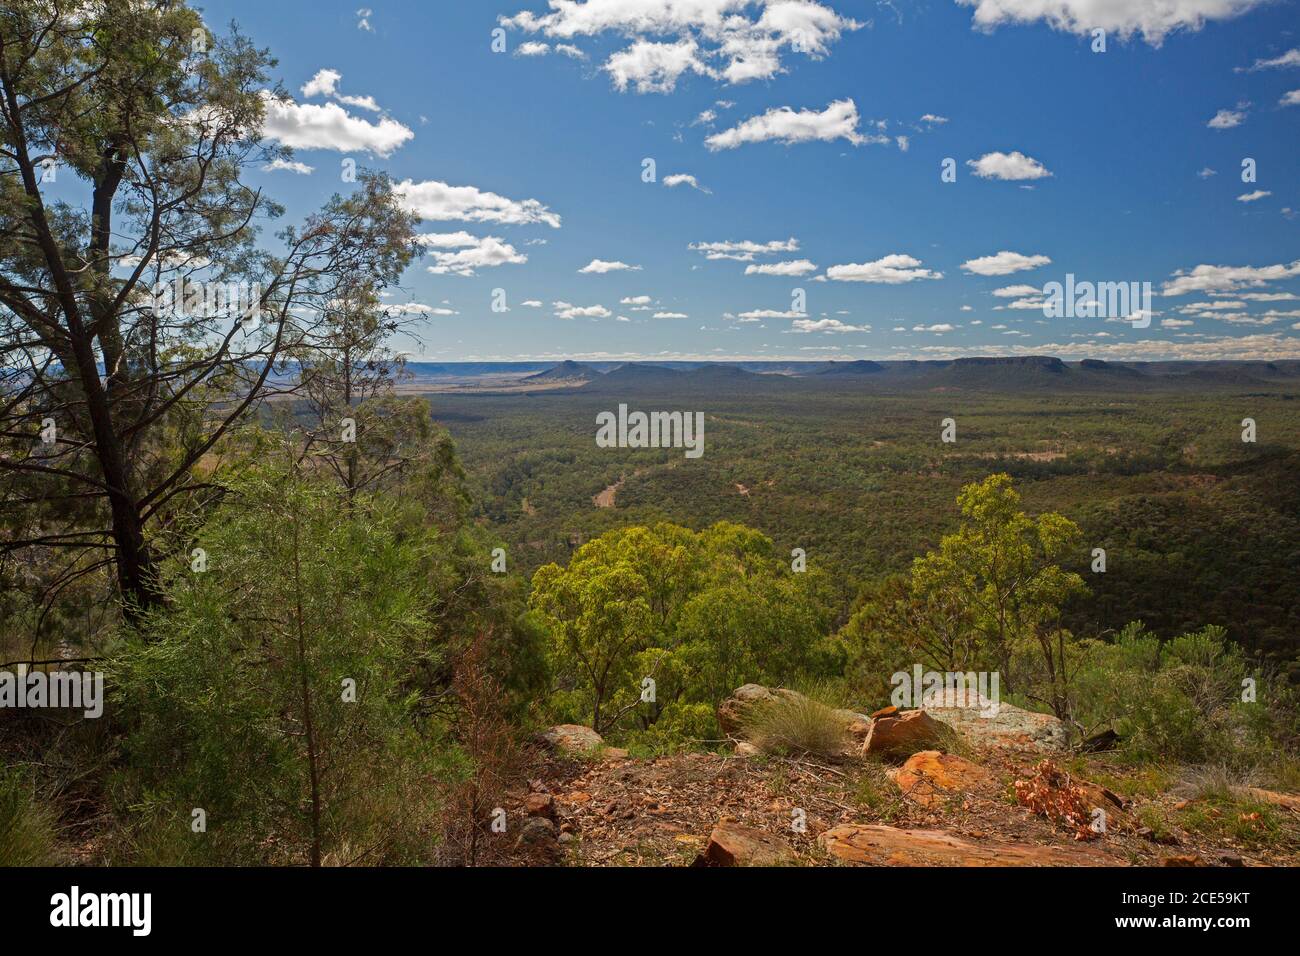 Landscape of hills and vast eucalypt forests viewed from high lookout at southern end of Arcadia Valley in central Queensland Australia Stock Photo